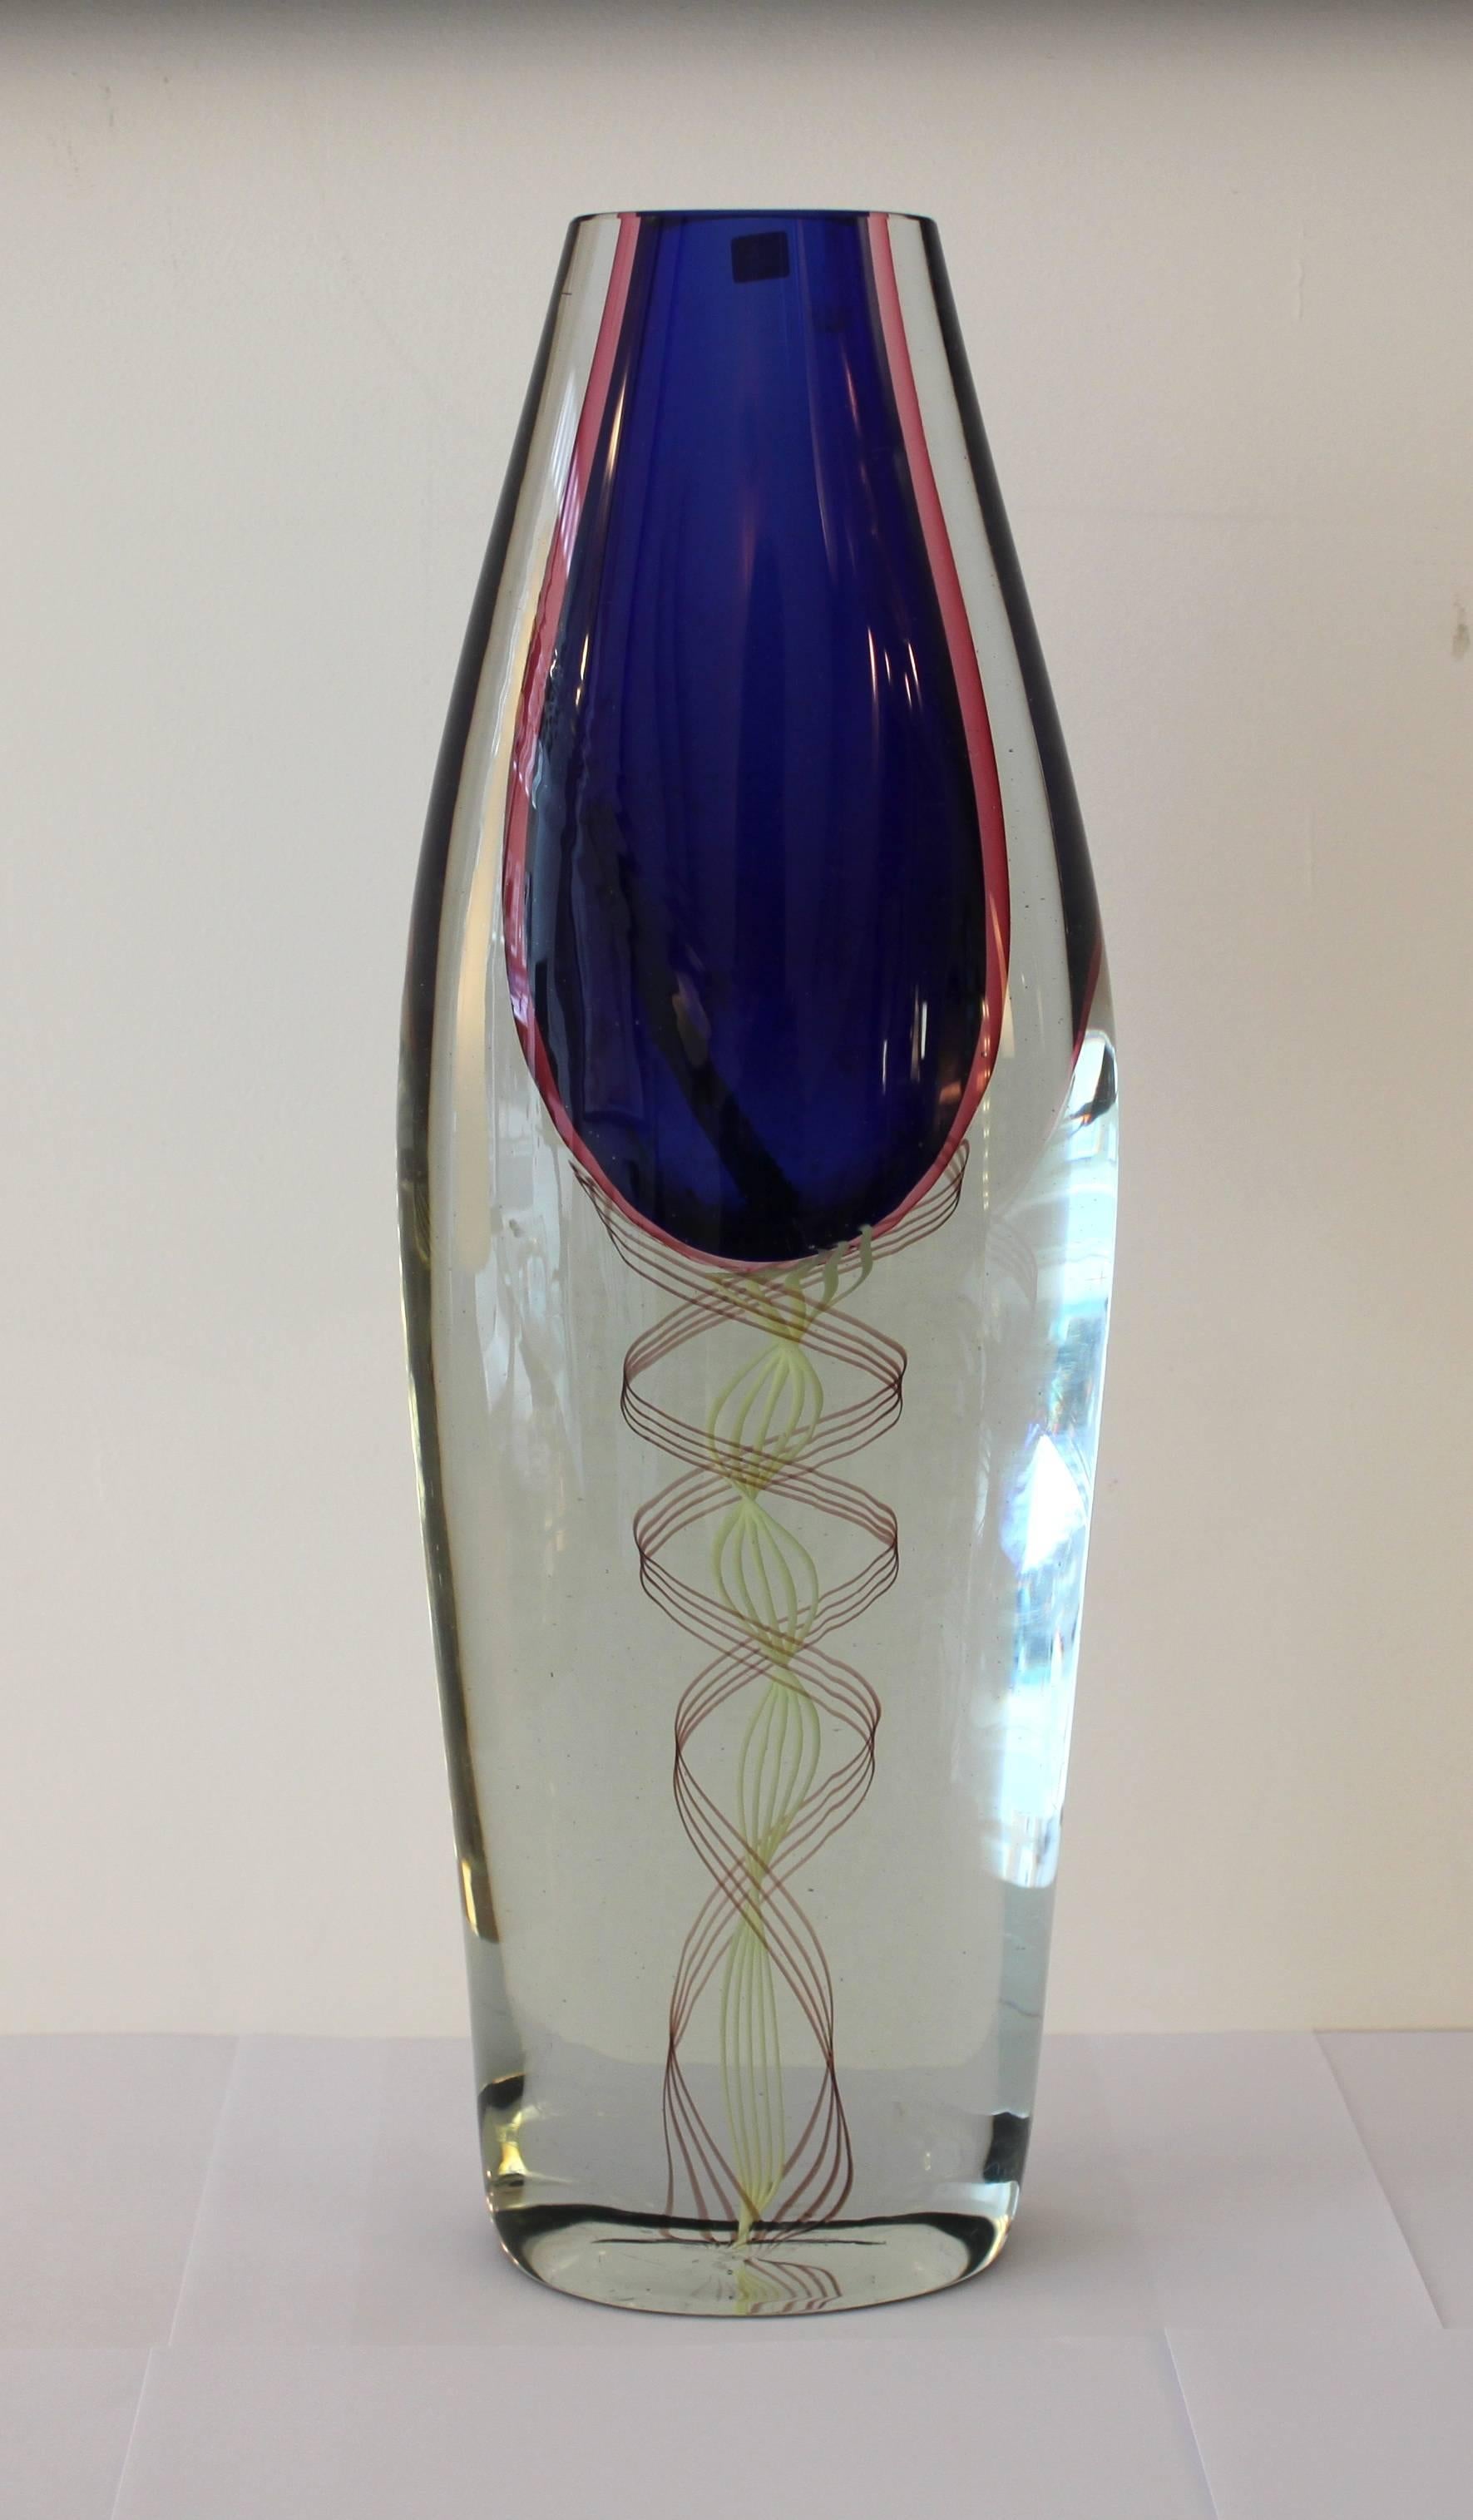 Decorative Sommerso technique vase by Lucio Gaspari for Salviati.

The clear glass vase has a number of three dimensional coloured glass filaments encased in the base with a blue glass encased to form the container. 

Italian, 1960s.